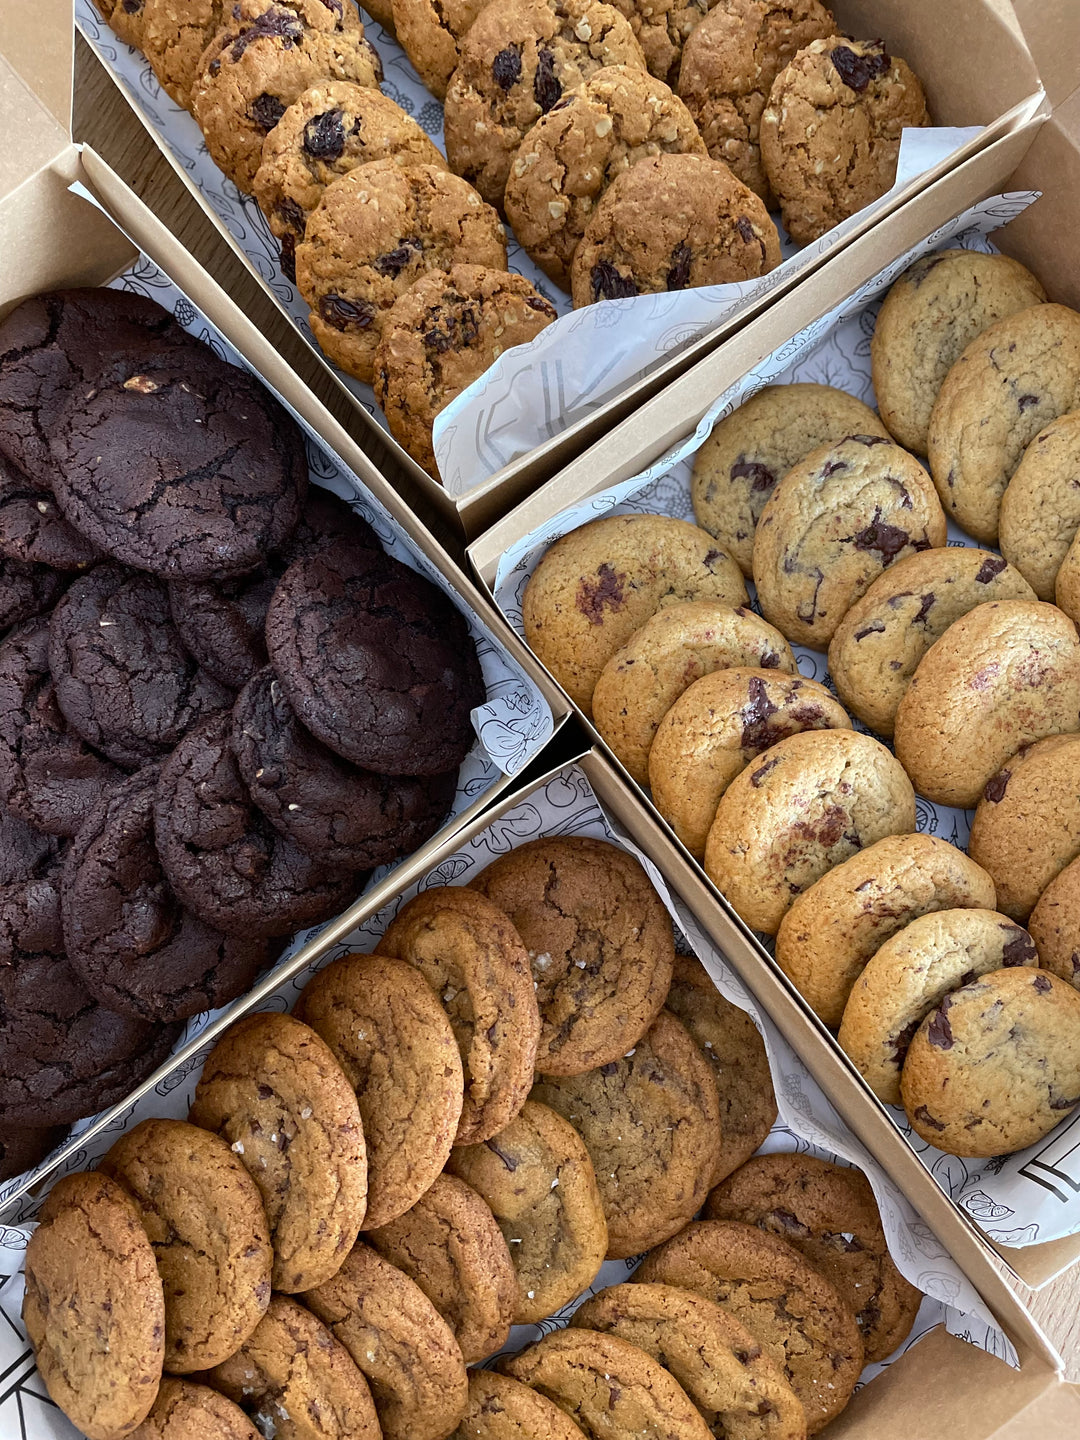 600 Cookies for National Cookie Day